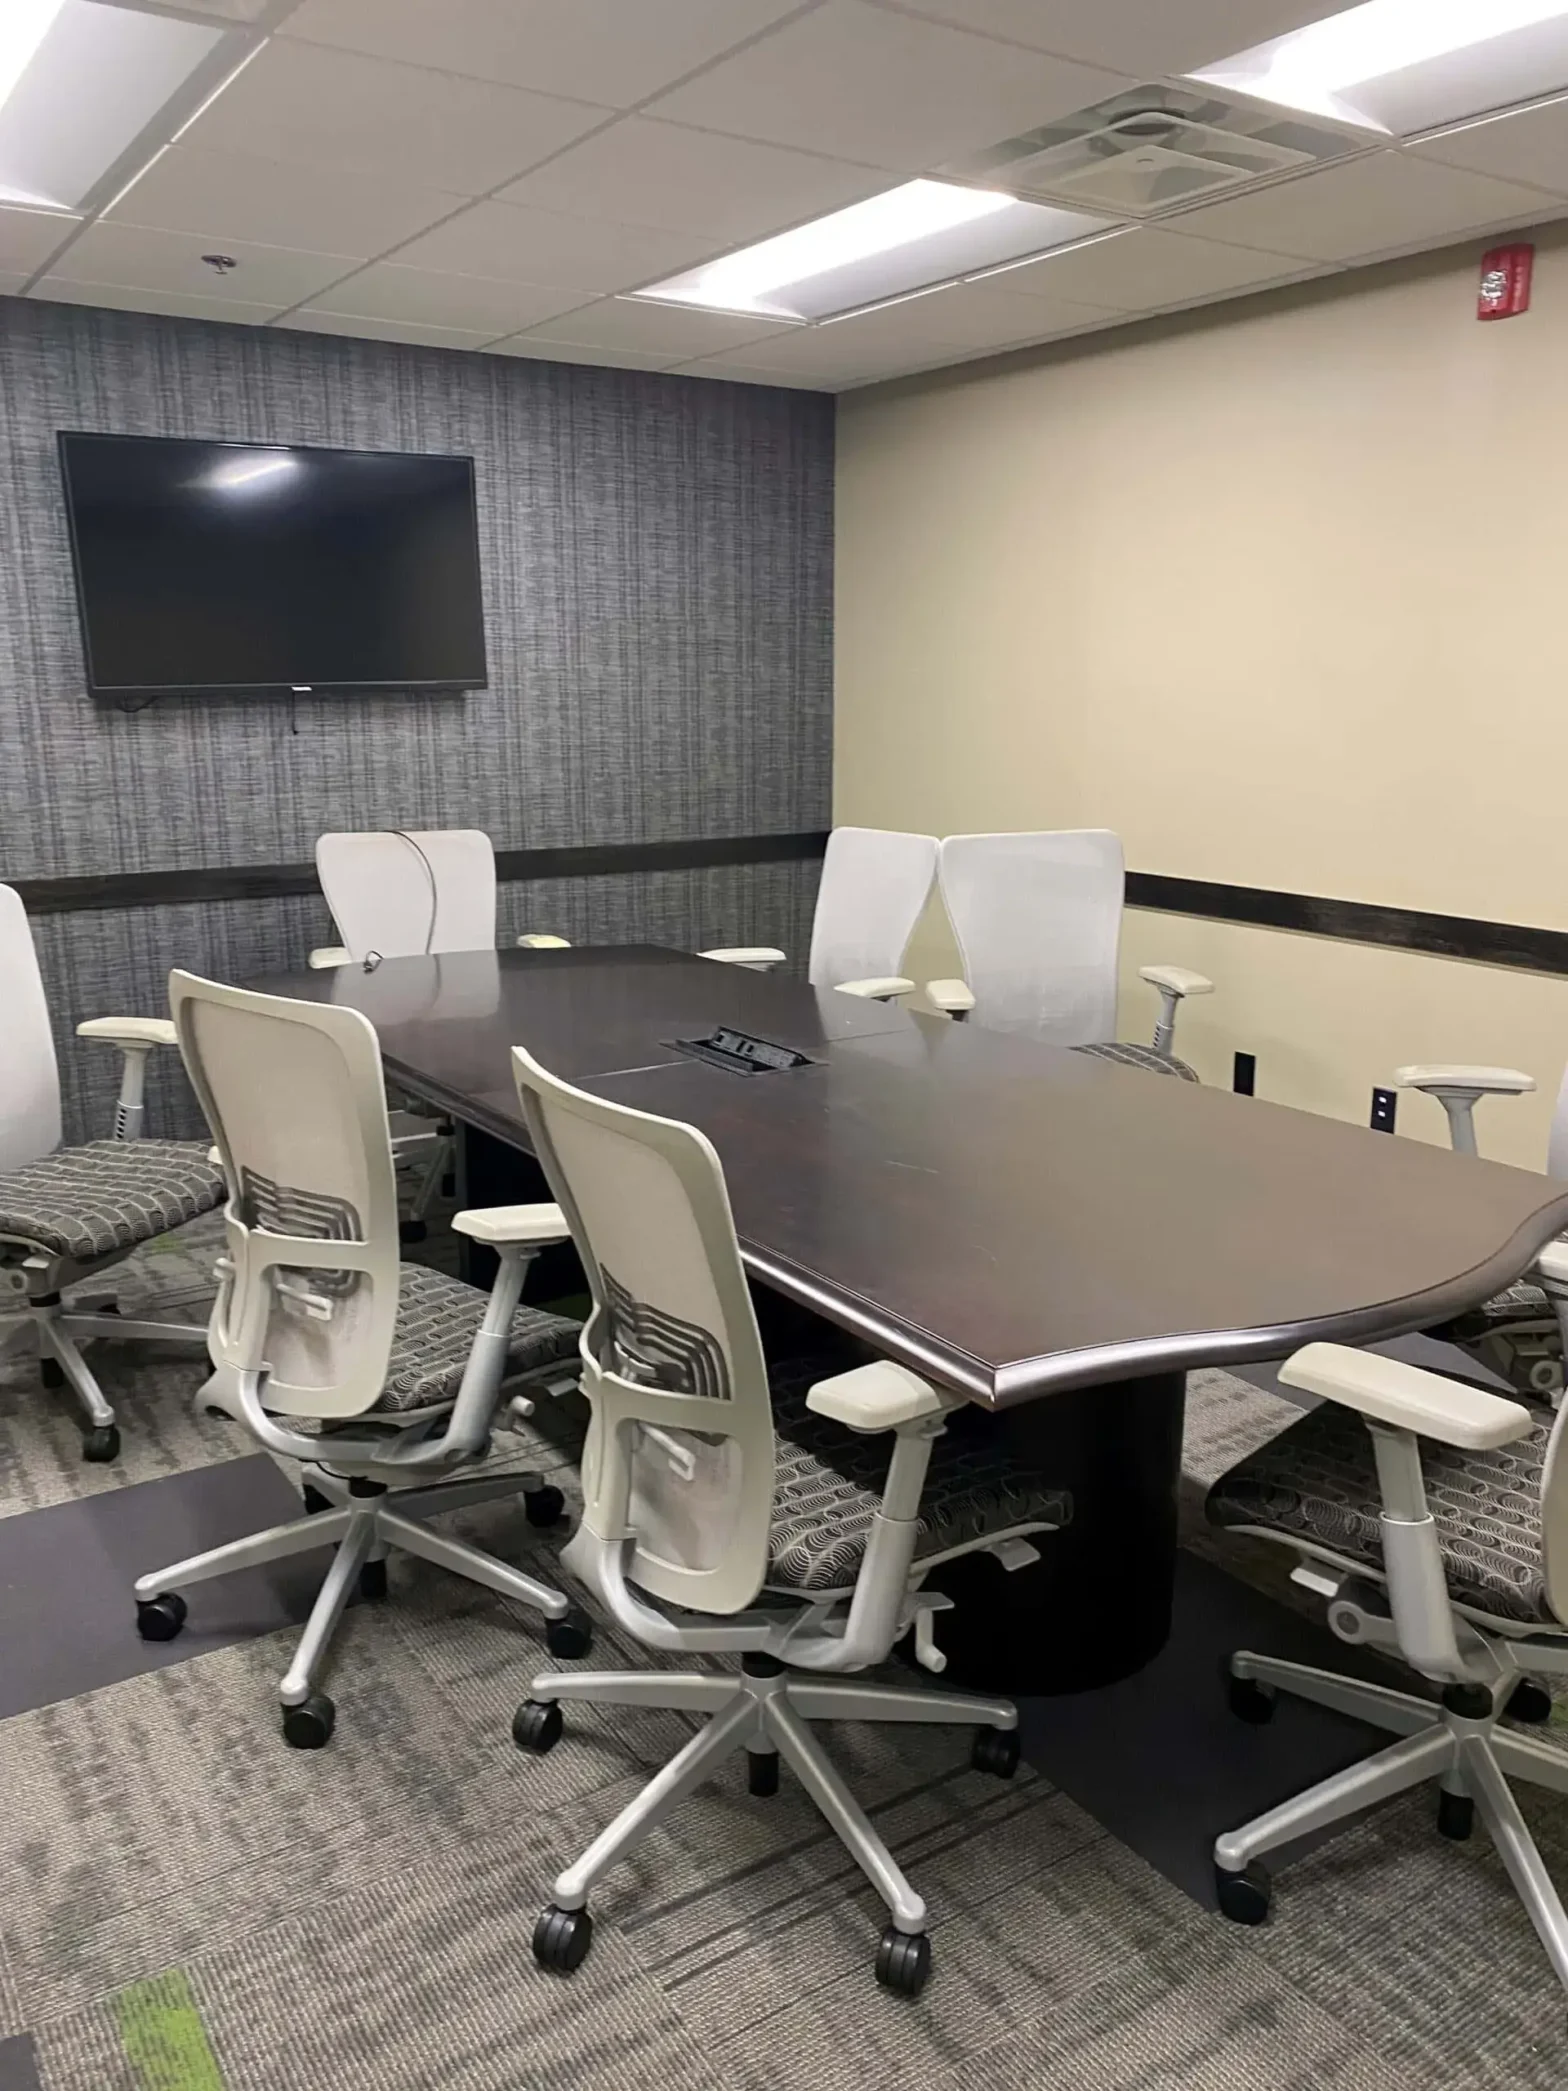 Explore Coworking Space Parsippany NJ services for On-Demand office space solutions for all your needs. Scheudle tour to learn more.!